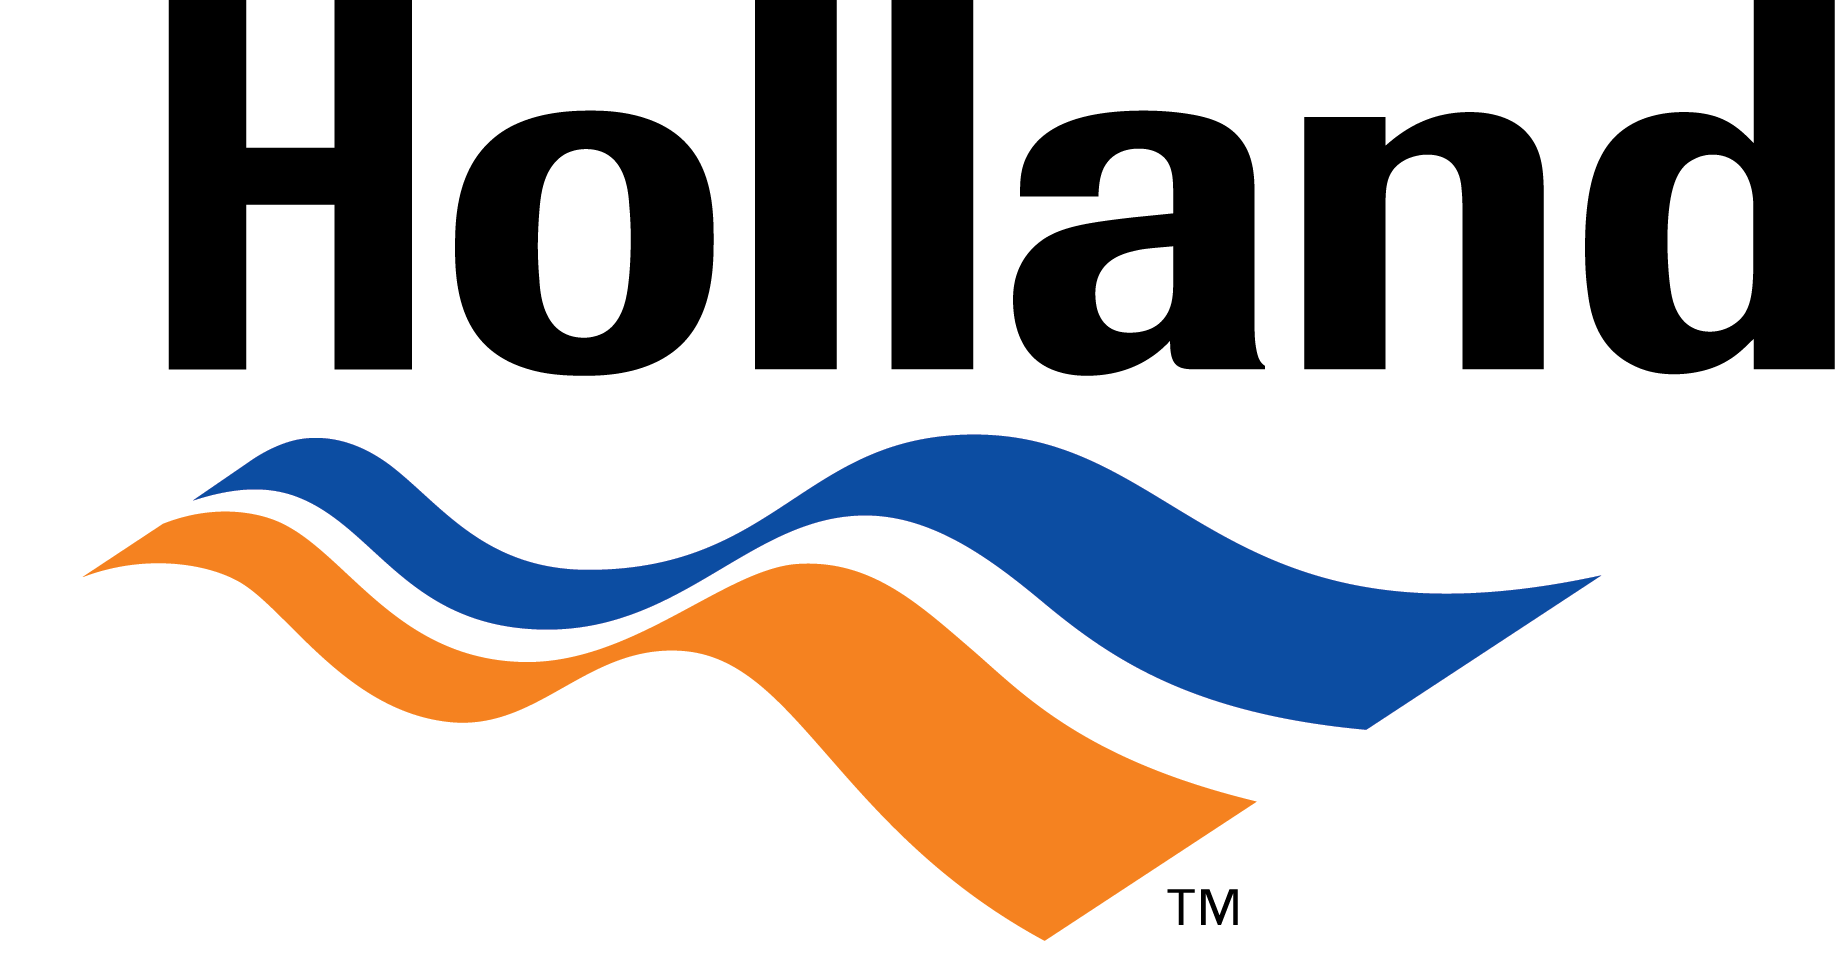 USF Holland Logo - About Holland